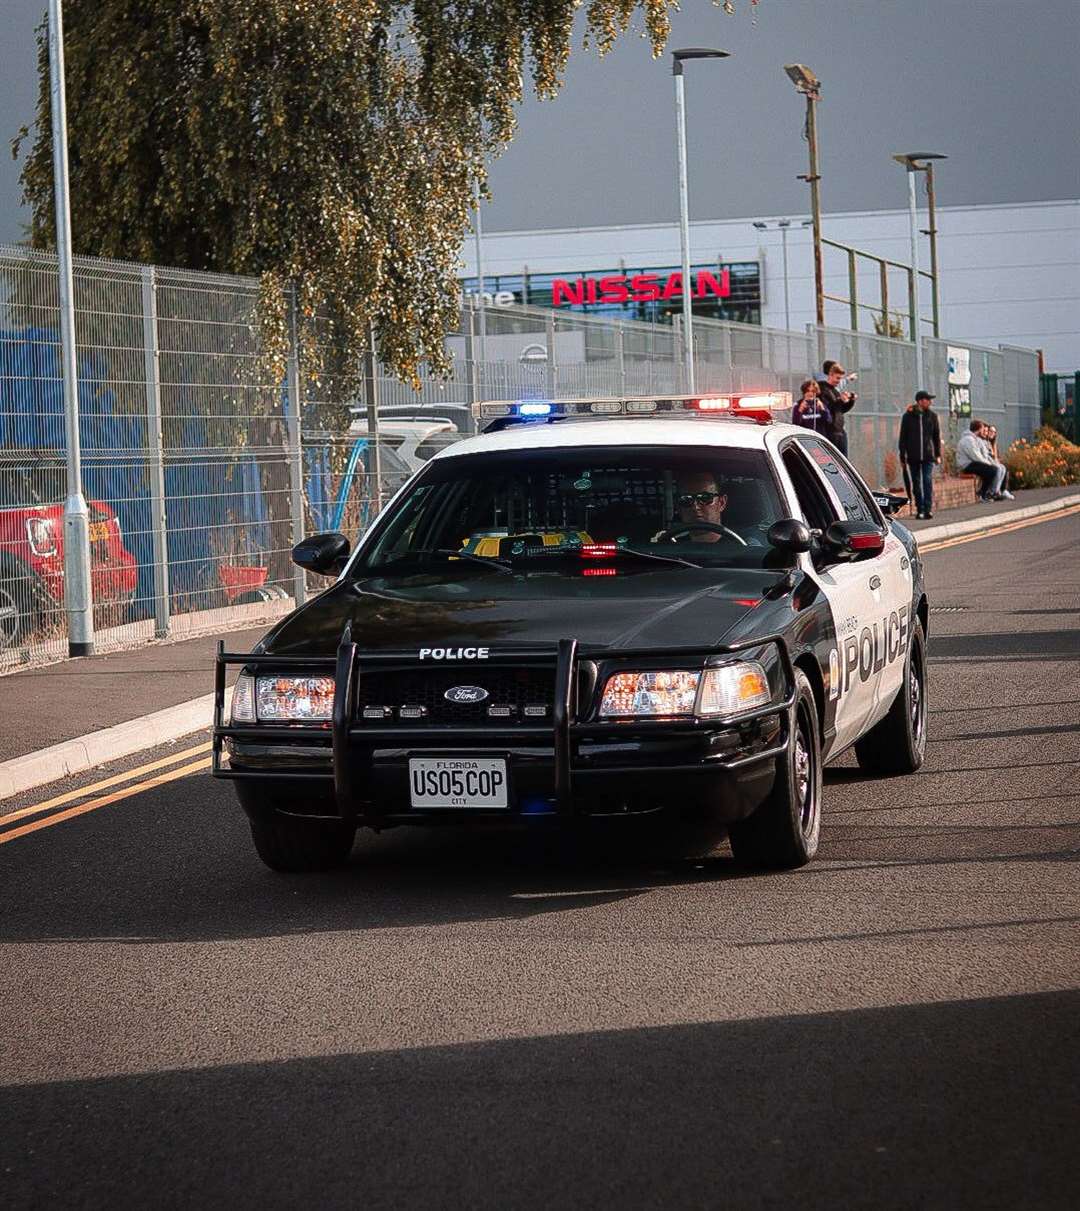 A US cop car featured as part of a Kent Car meets Air Ambulance charity event. Photo: Taylor Williams/Williamstphotography